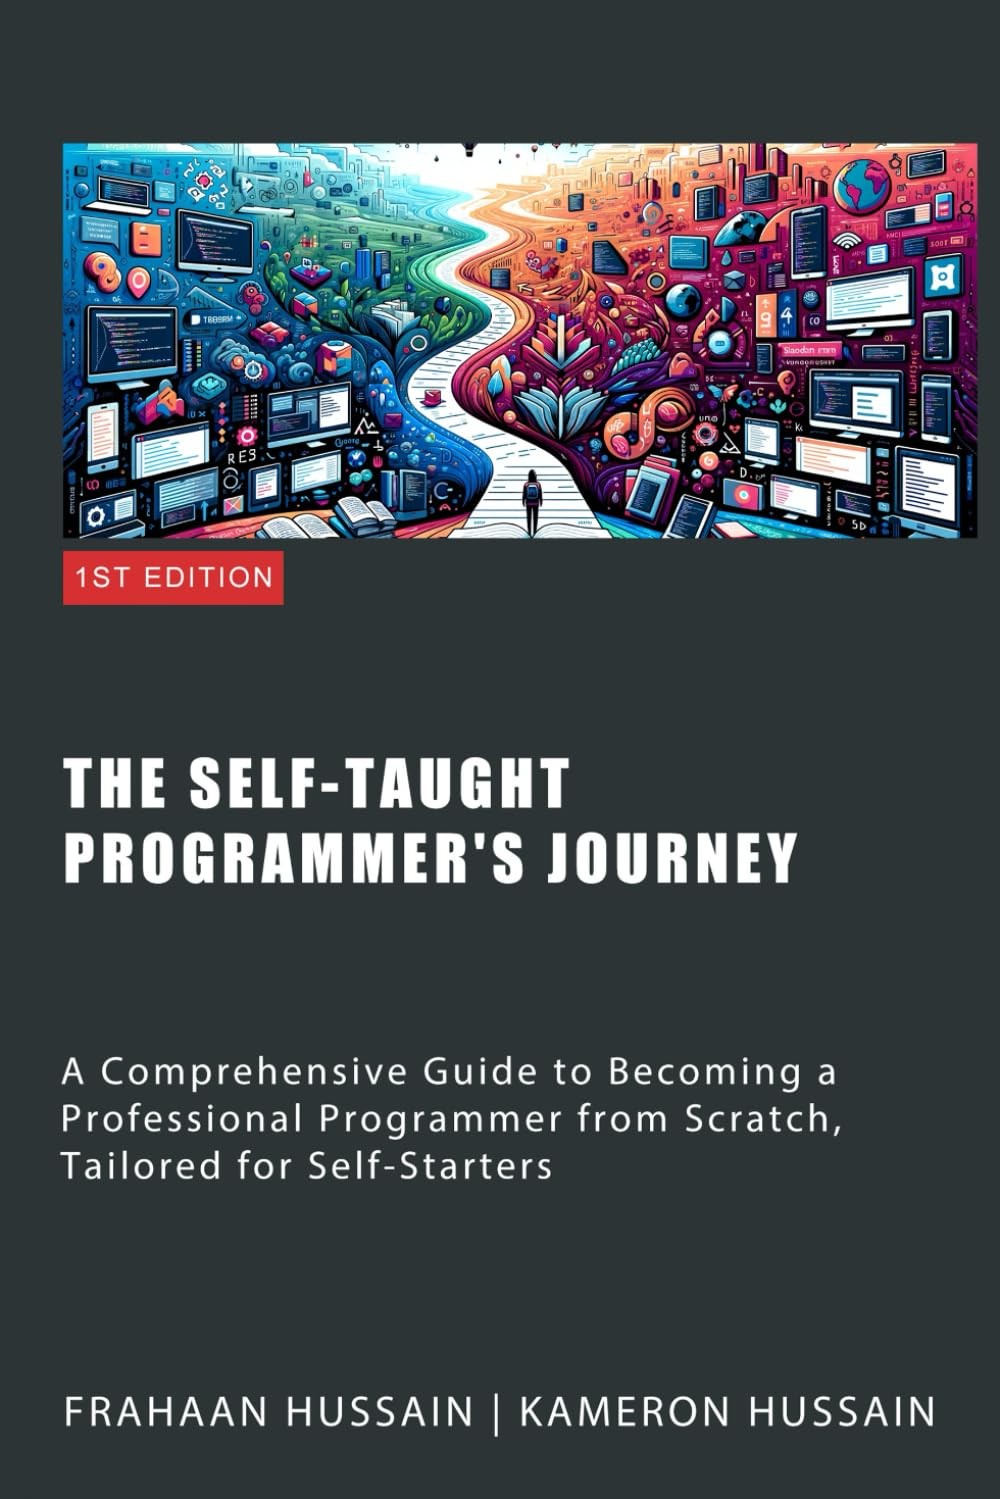 The Self-Taught Progammer's Journey: A Comprehensive Guide to Becoming a Professional Programmer From Scratch, Tailored for Self-Starters